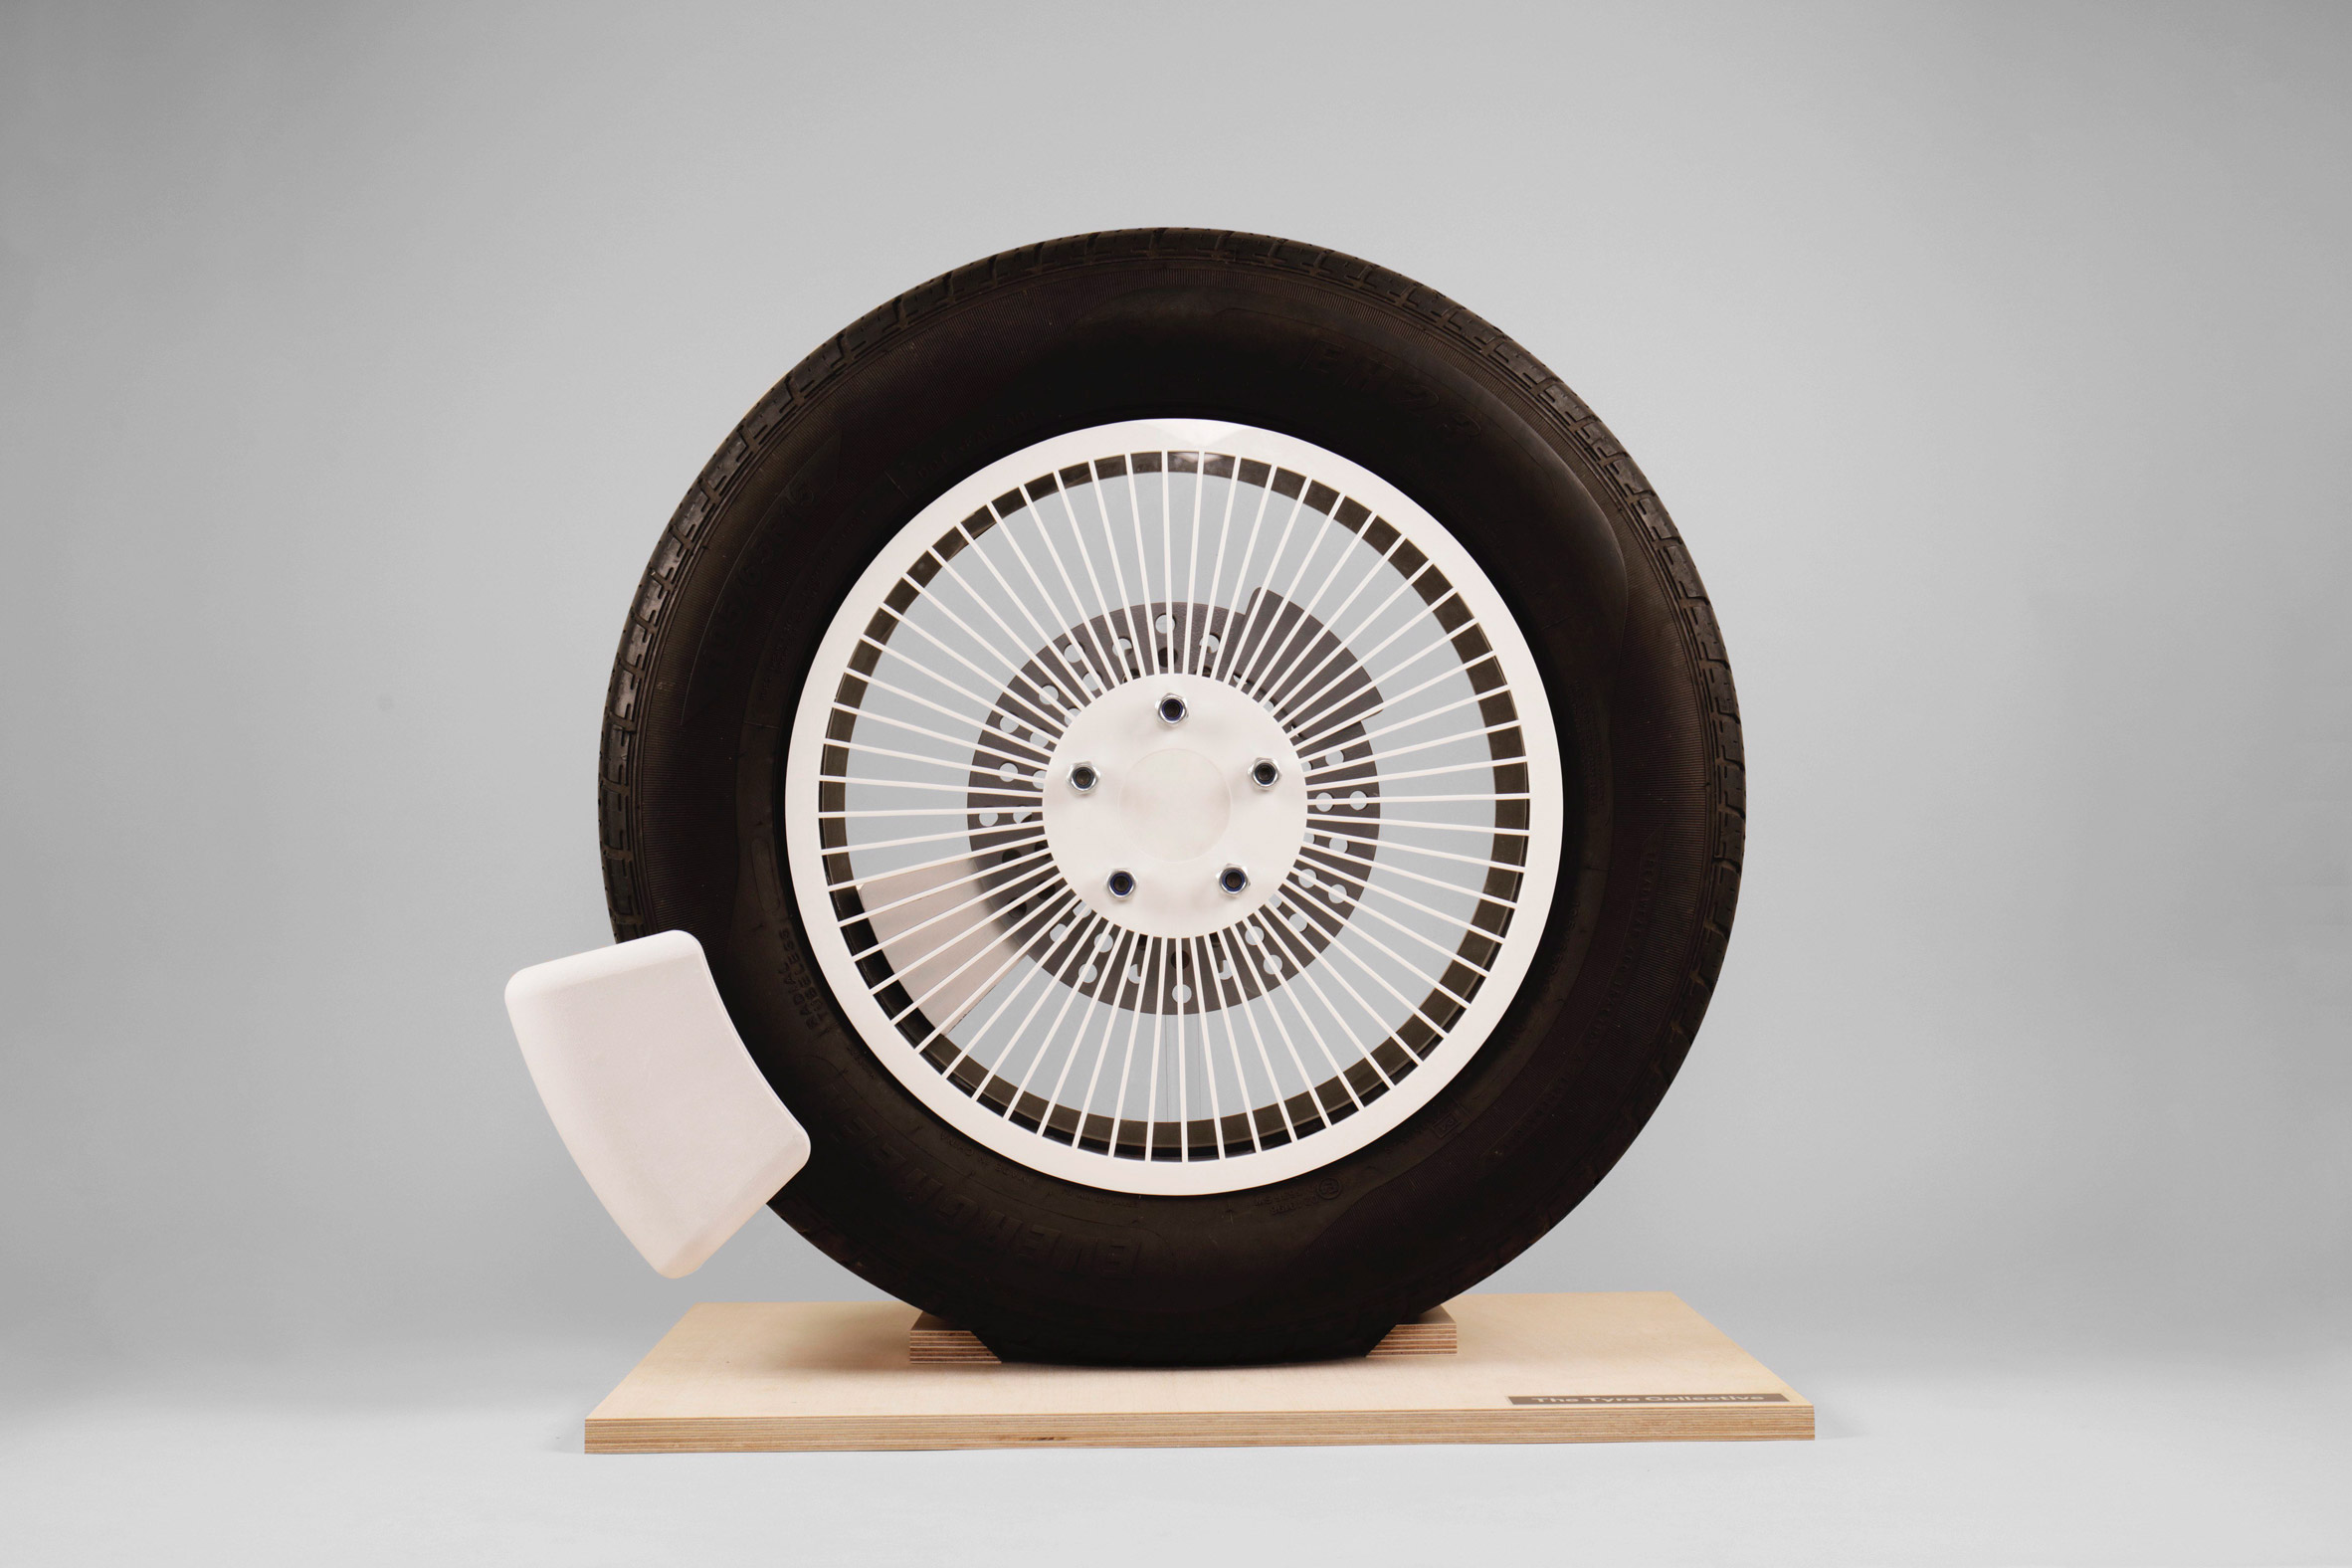 The Tyre Collective's TC01 device has won the national James Dyson Award 2020